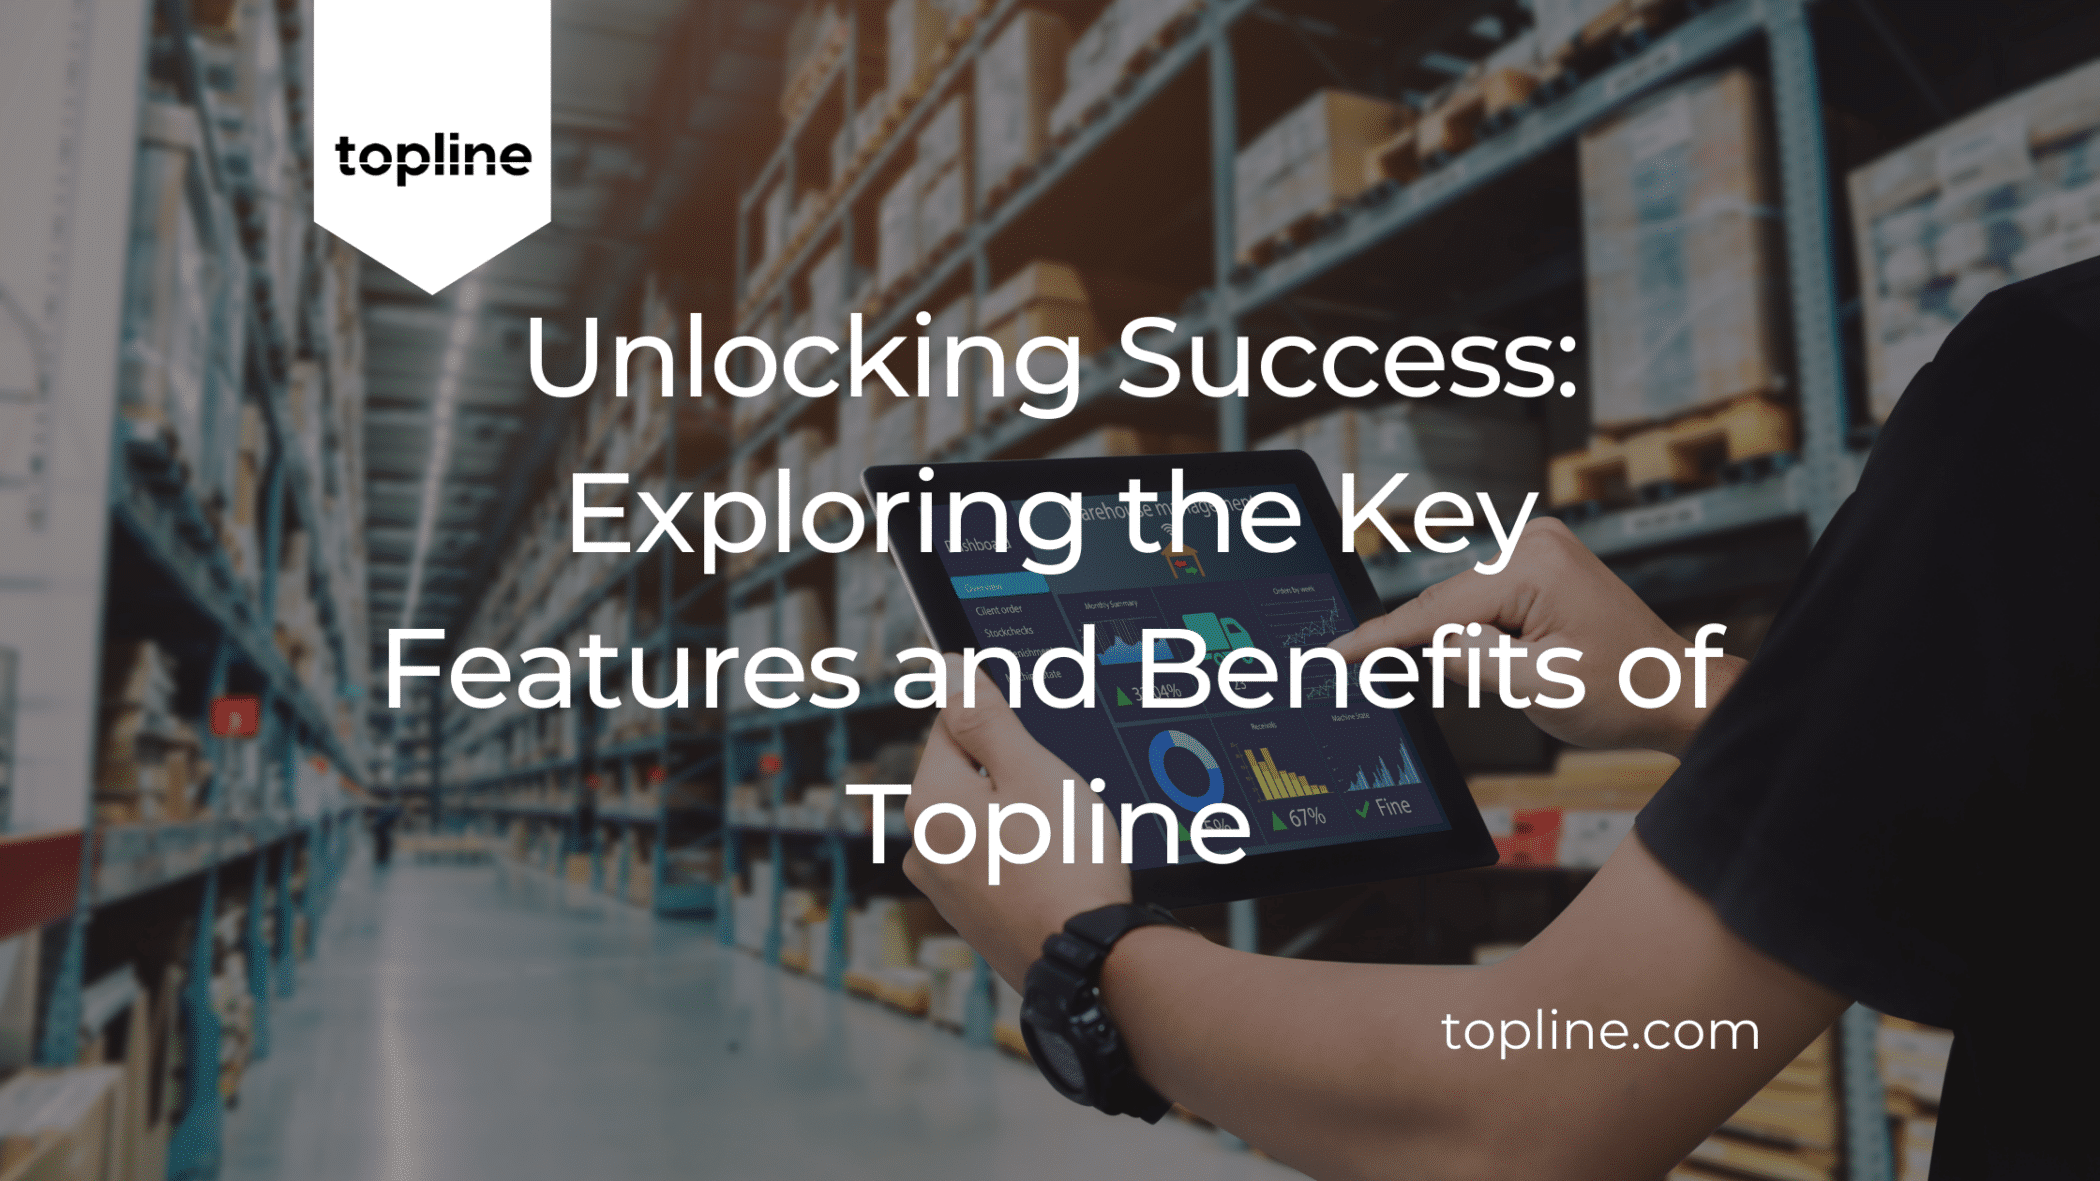 Unlocking Success: Exploring the Key Features and Benefits of Topline